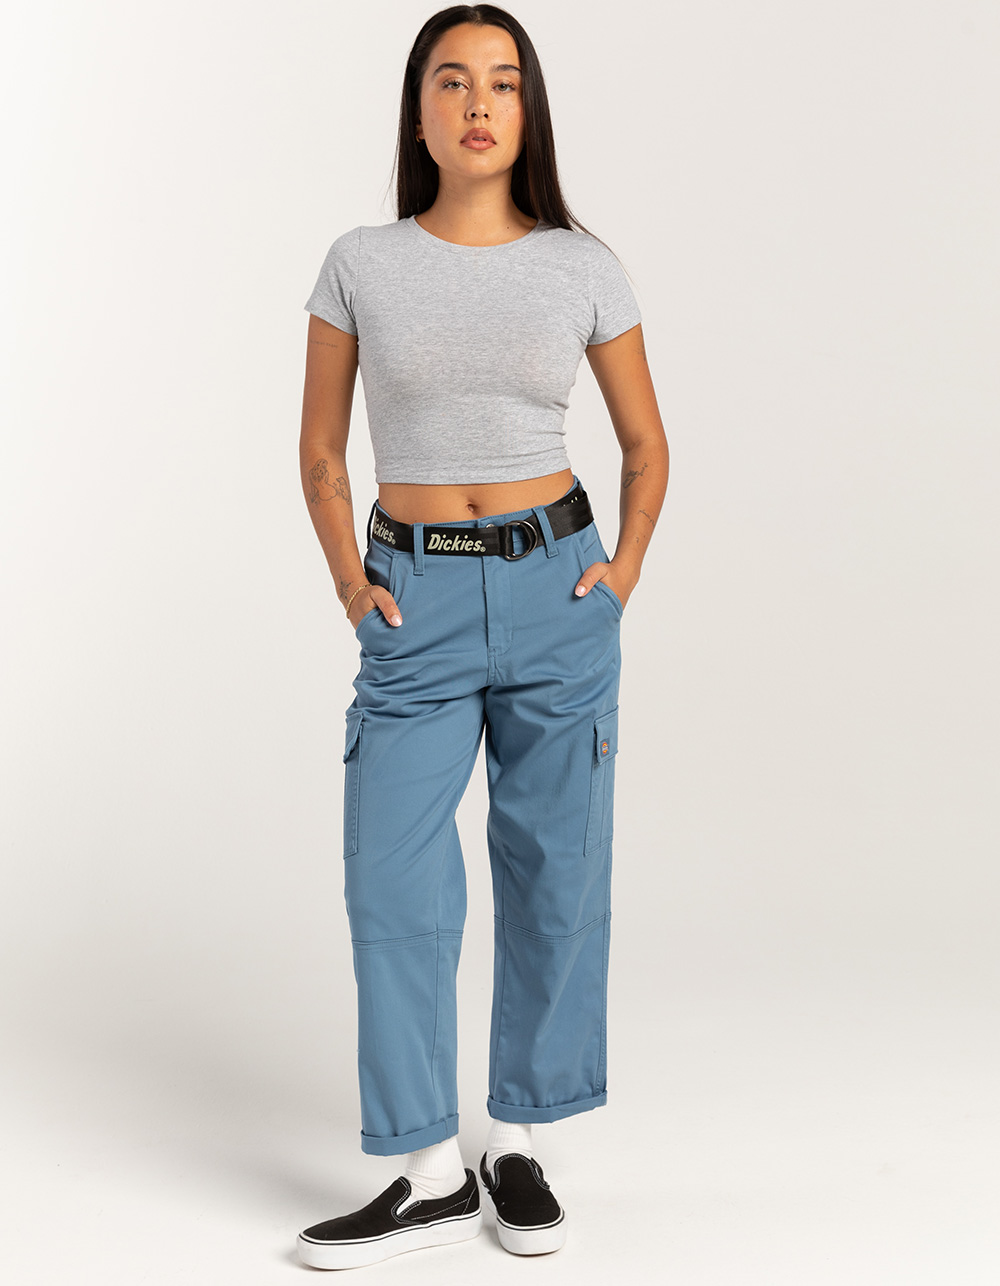 Dickies: Clothing For Women